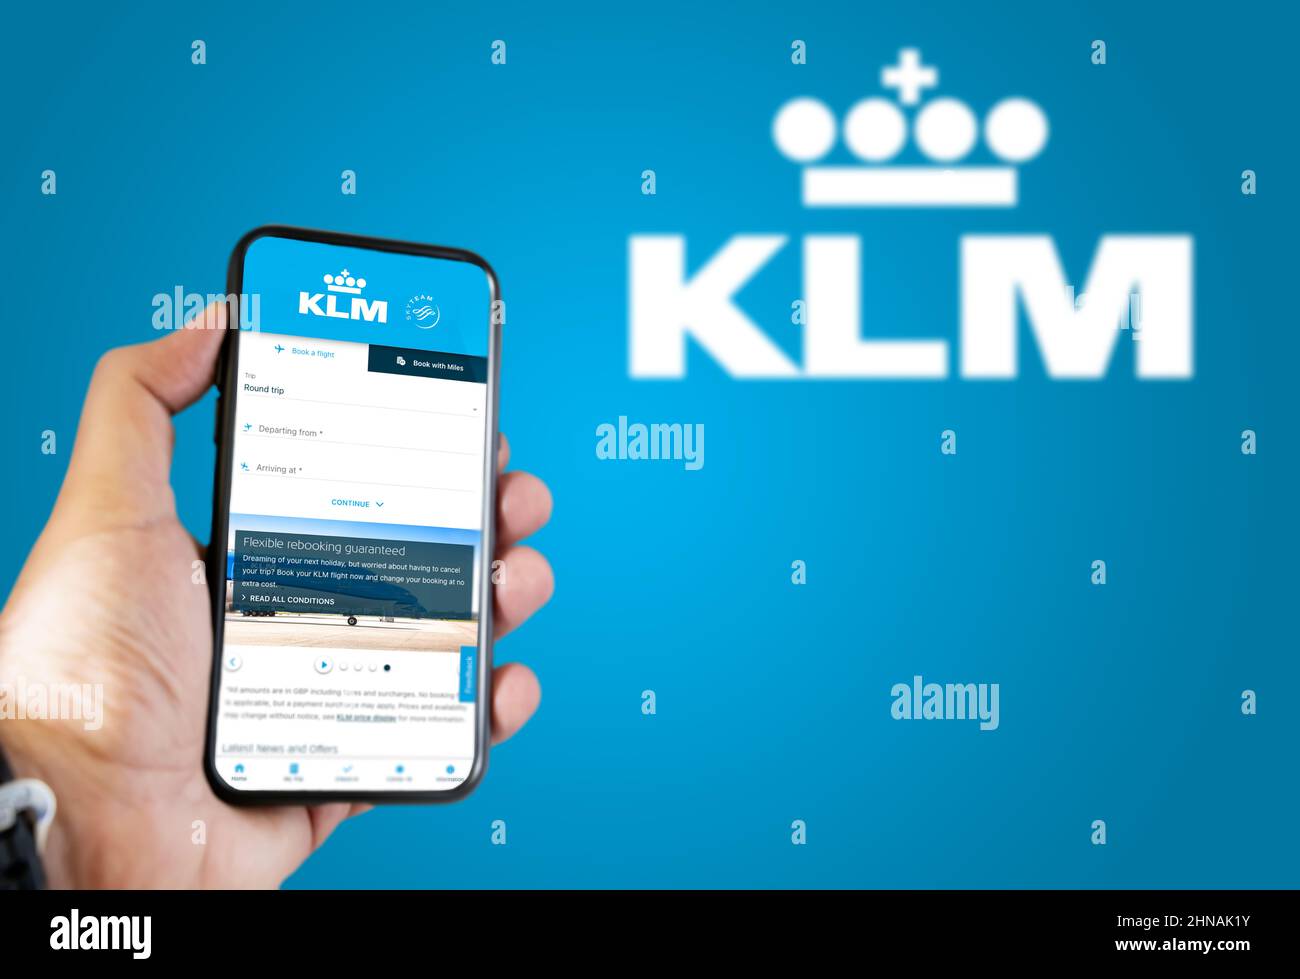 Amsterdam, NED, October 2021: Hand holding a phone with KLM Airlines flight booking application. KLM Airlines logo blurred on a blue background. Booki Stock Photo